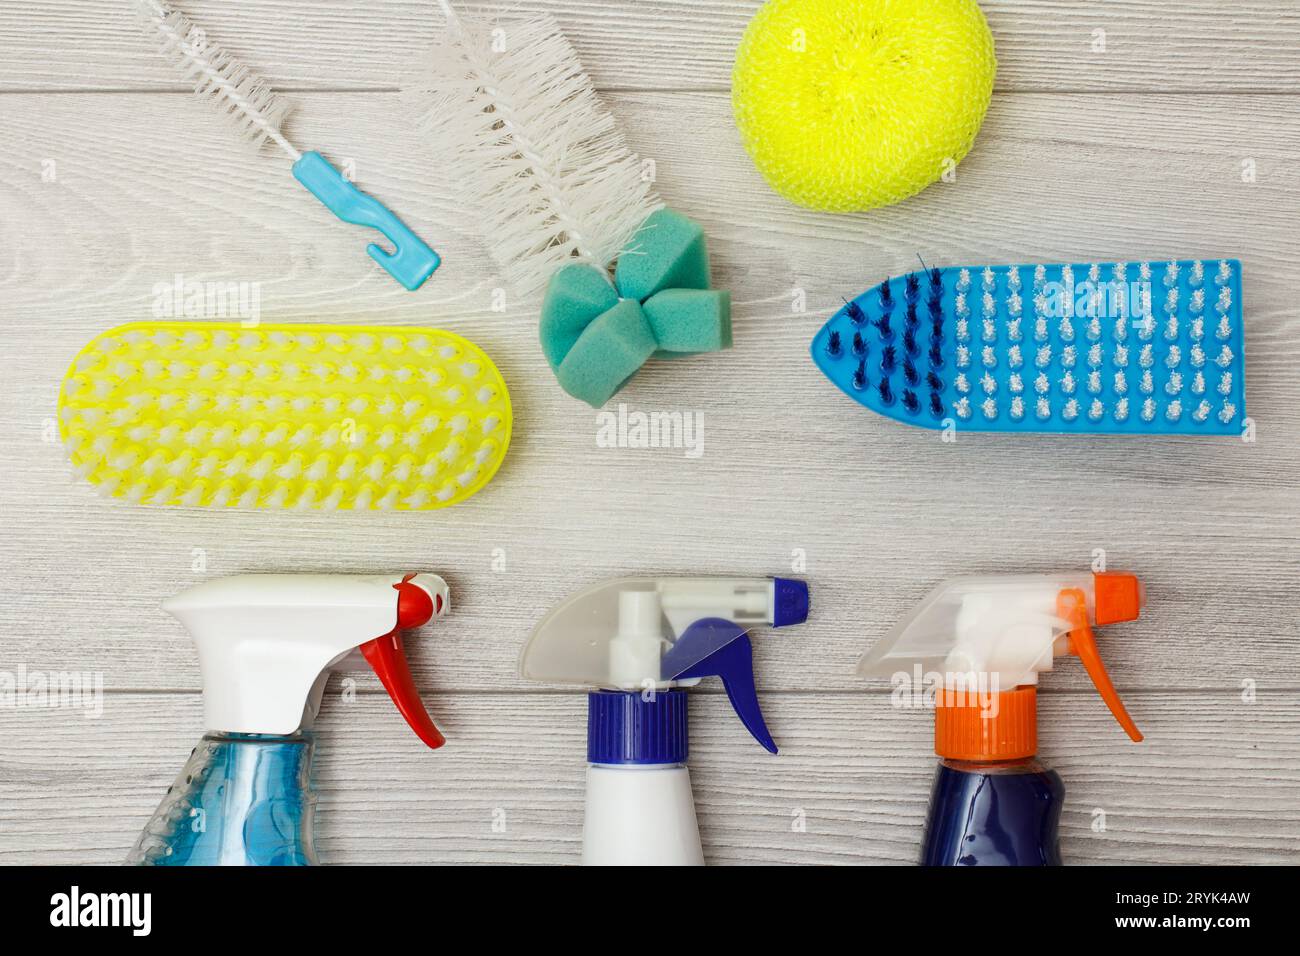 Water sprayers, color synthetic sponges for cleaning and dust brushes. Stock Photo